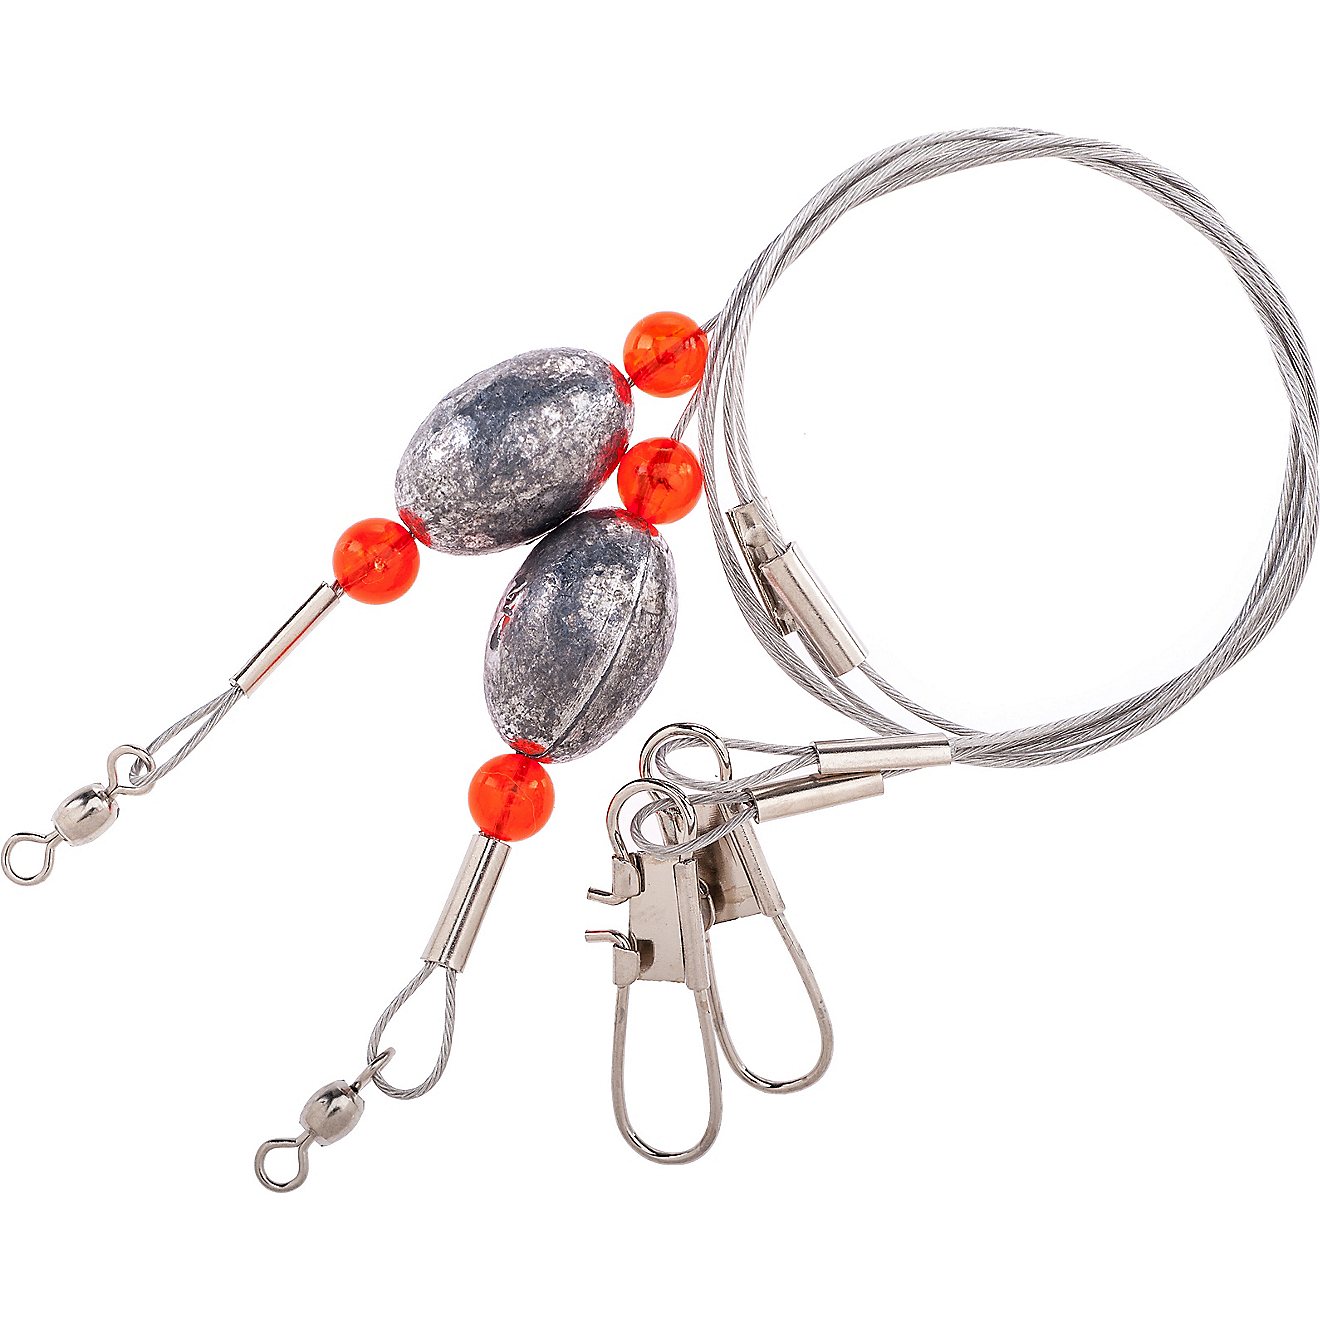 Lazer Sharp 1/2 oz. - 18" Ready Rigs with Egg Sinkers 2-Pack                                                                     - view number 1